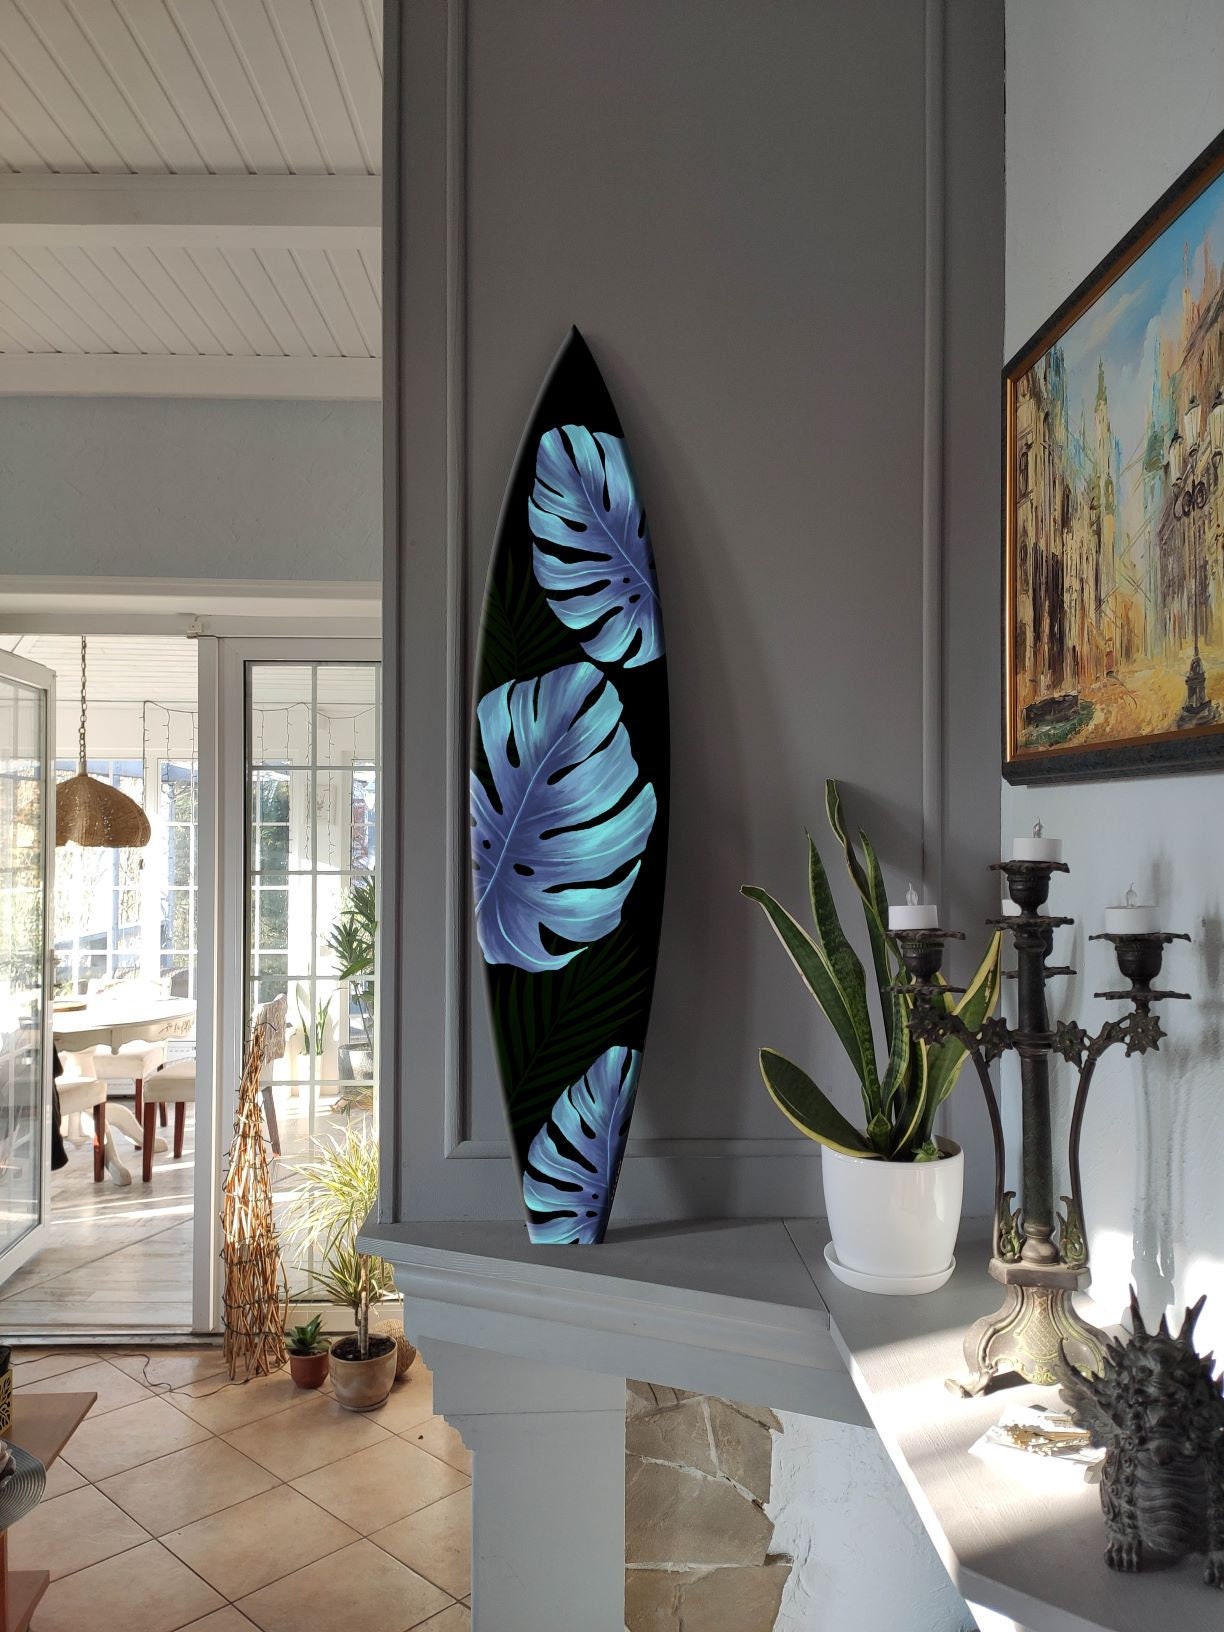 Handmade Decorative Wooden Surfboard with Monstera Leaves - Black & Blue for Tropical Beach Decor